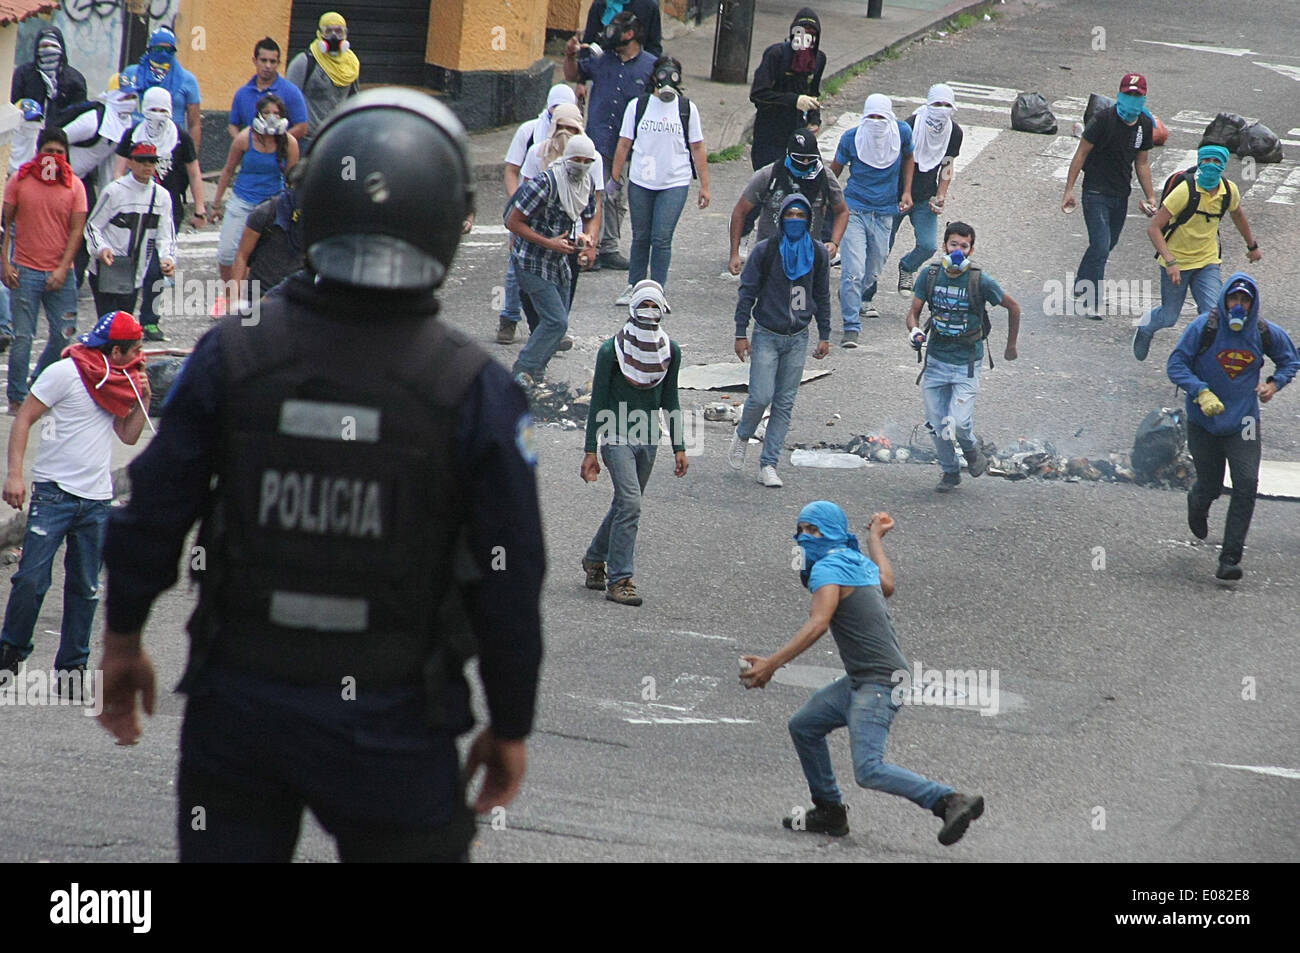 Tachira, Venezuela. 5th May, 2014. Demonstrators clash with members of the Public Order Brigade of the National Bolivarian Police during an anti-government protest in front of Catholic University of Tachira, Venezuela, on May 5, 2014. Credit:  George Castro/Xinhua/Alamy Live News Stock Photo